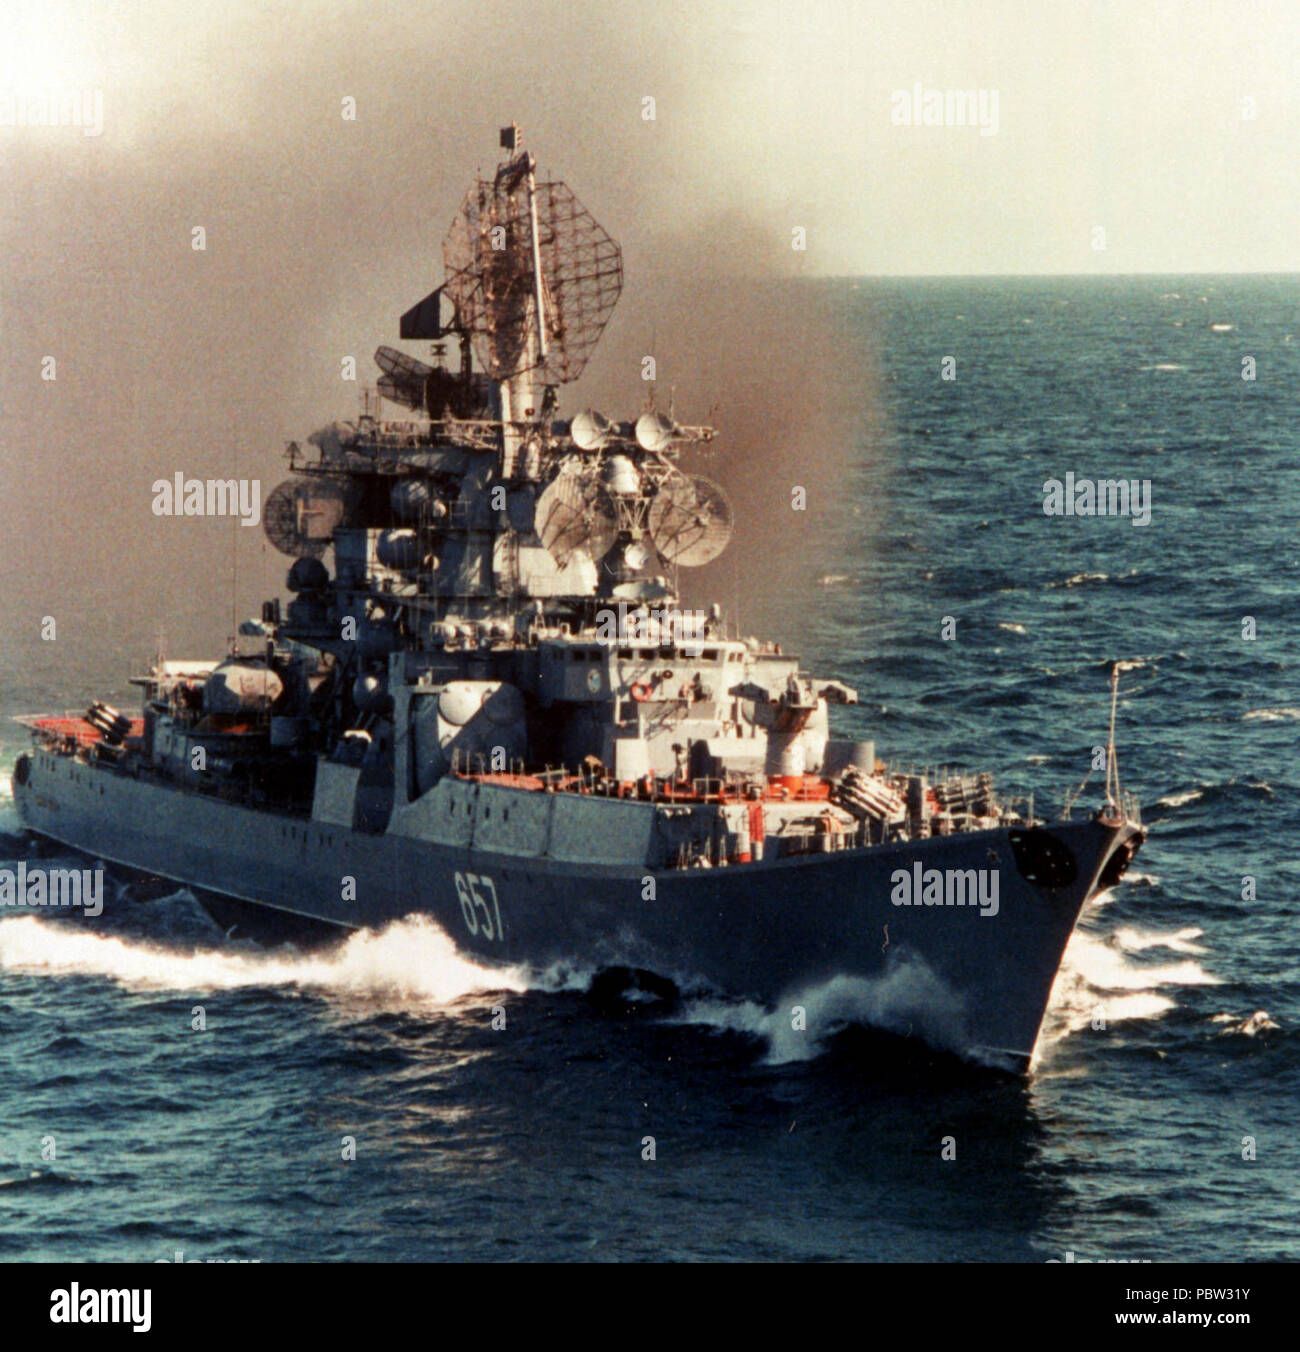 AdmiralYumashev1982a. A starboard bow view of the Soviet Kresta II Class guided missile cruiser ADMIRAL YUMASHEV underway. Stock Photo